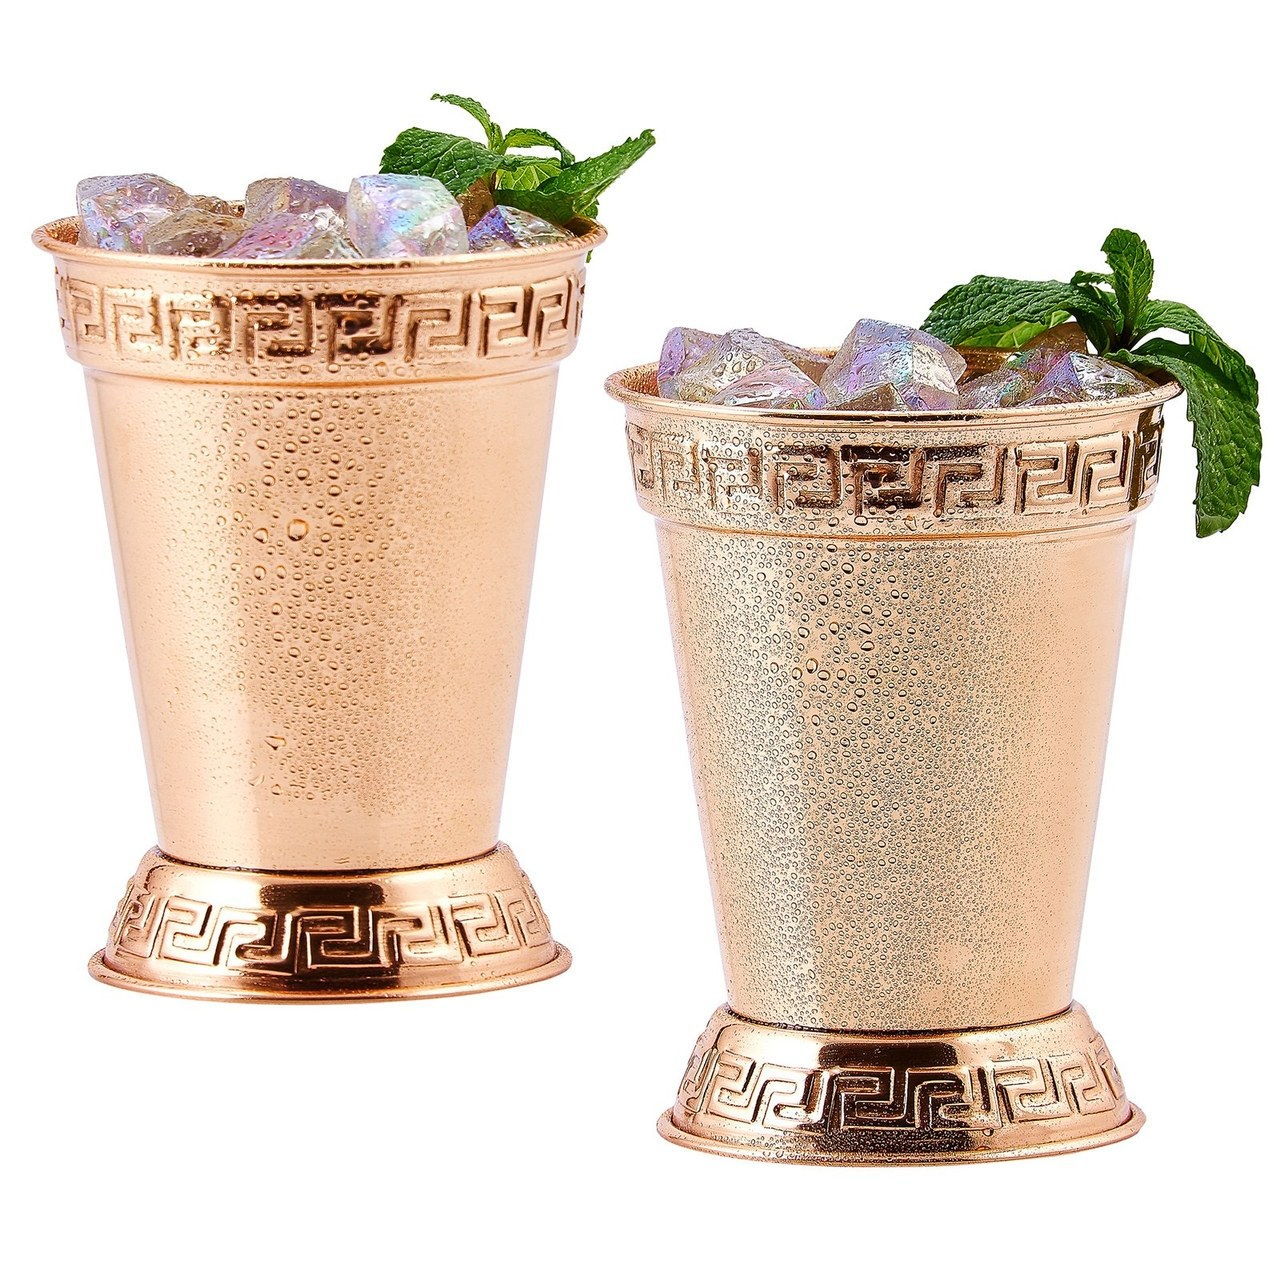 [Gammel Dutch Copper Mint Julep Cups](http://www.hayneedle.com/product/old-dutch-12-oz-copper-mint-julep-cups-set-of-2.cfm) from Hayneedle, $30.02 for 2.